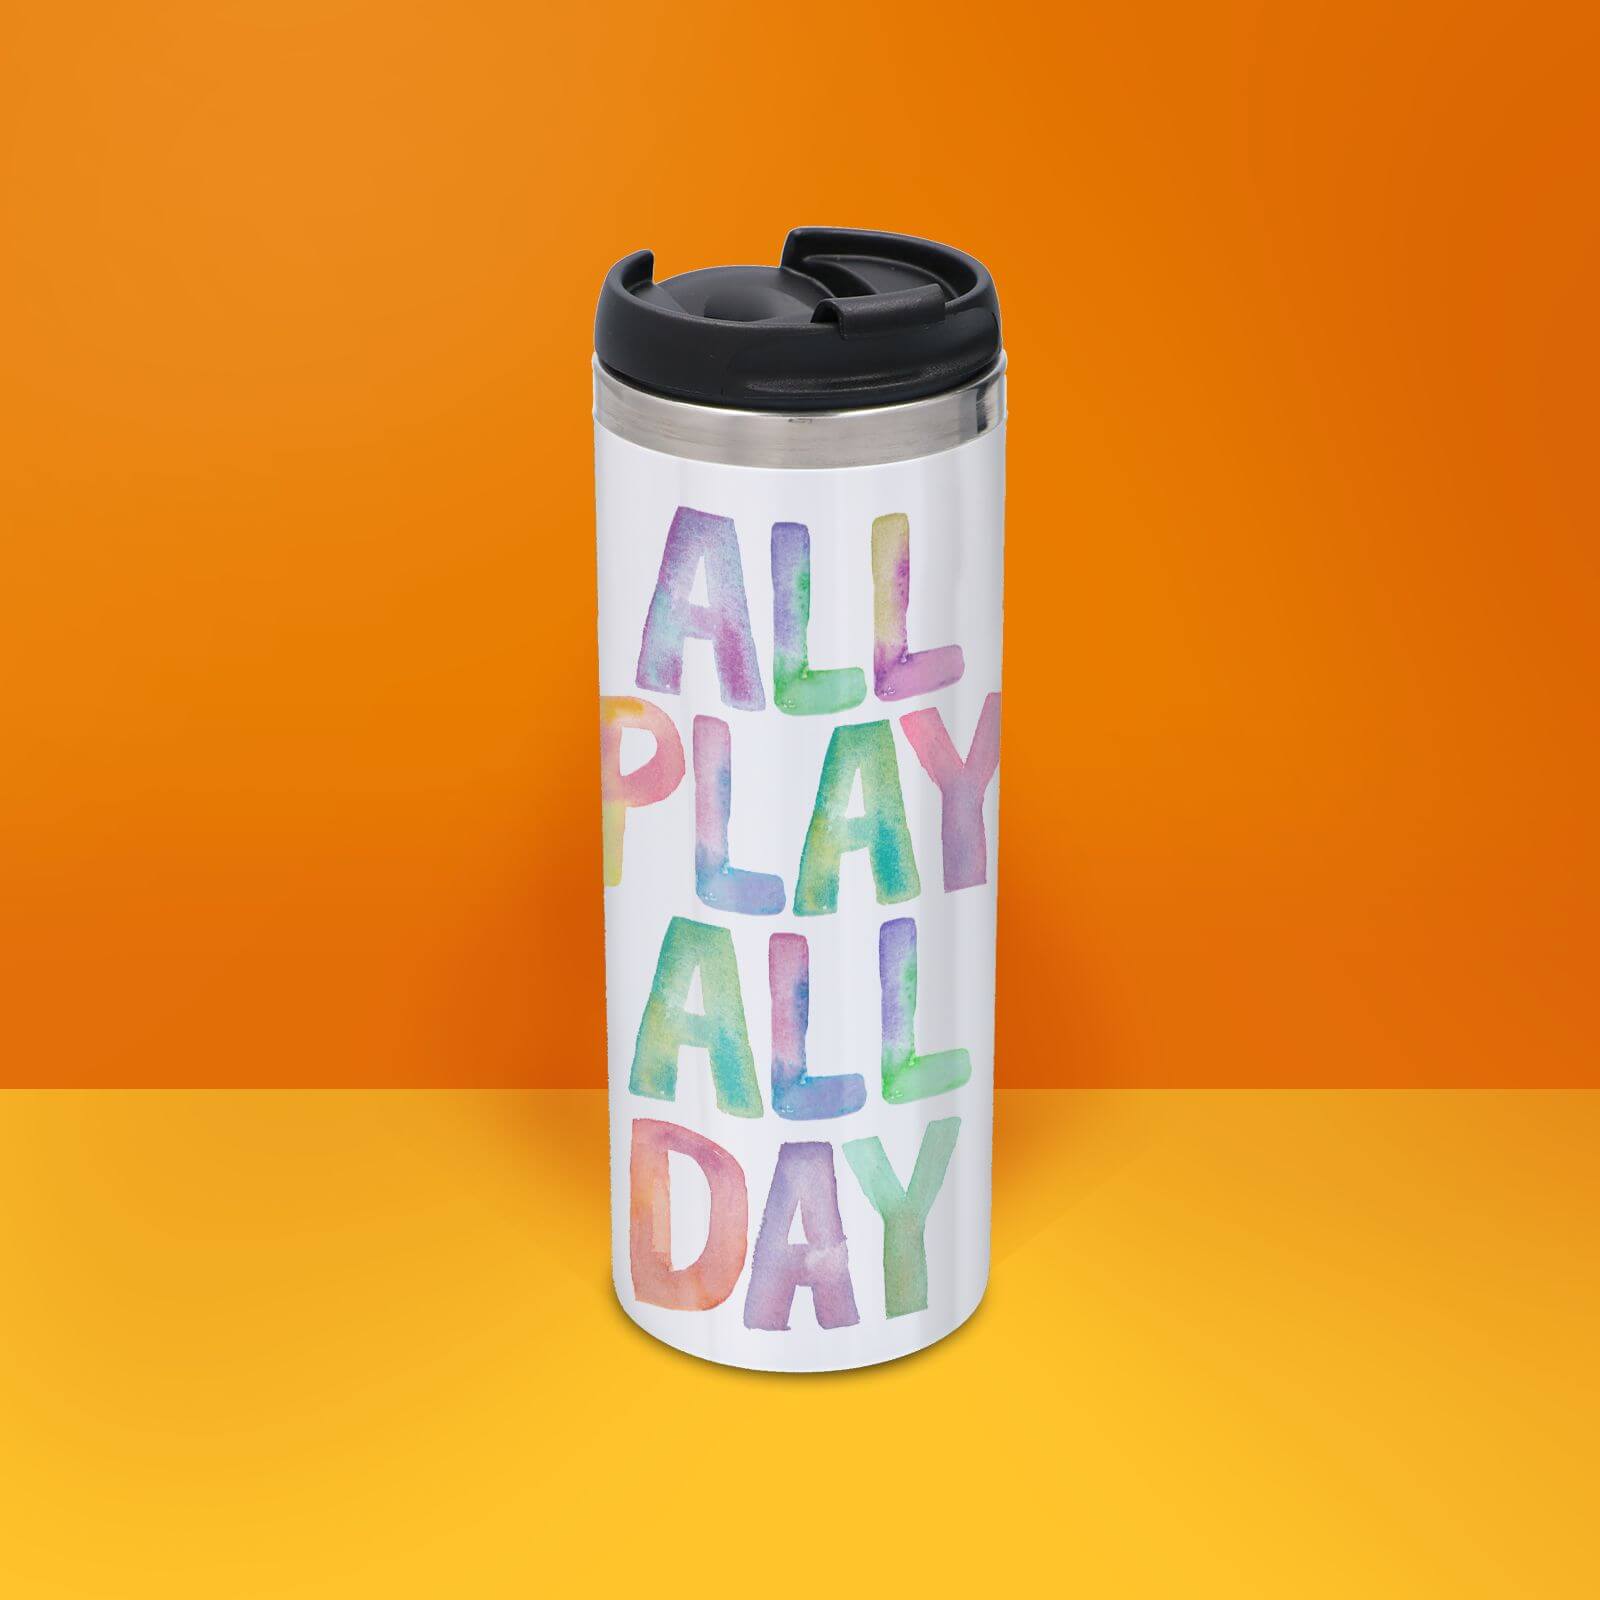 The Motivated Type All Play All Day Thermo Travel Mug